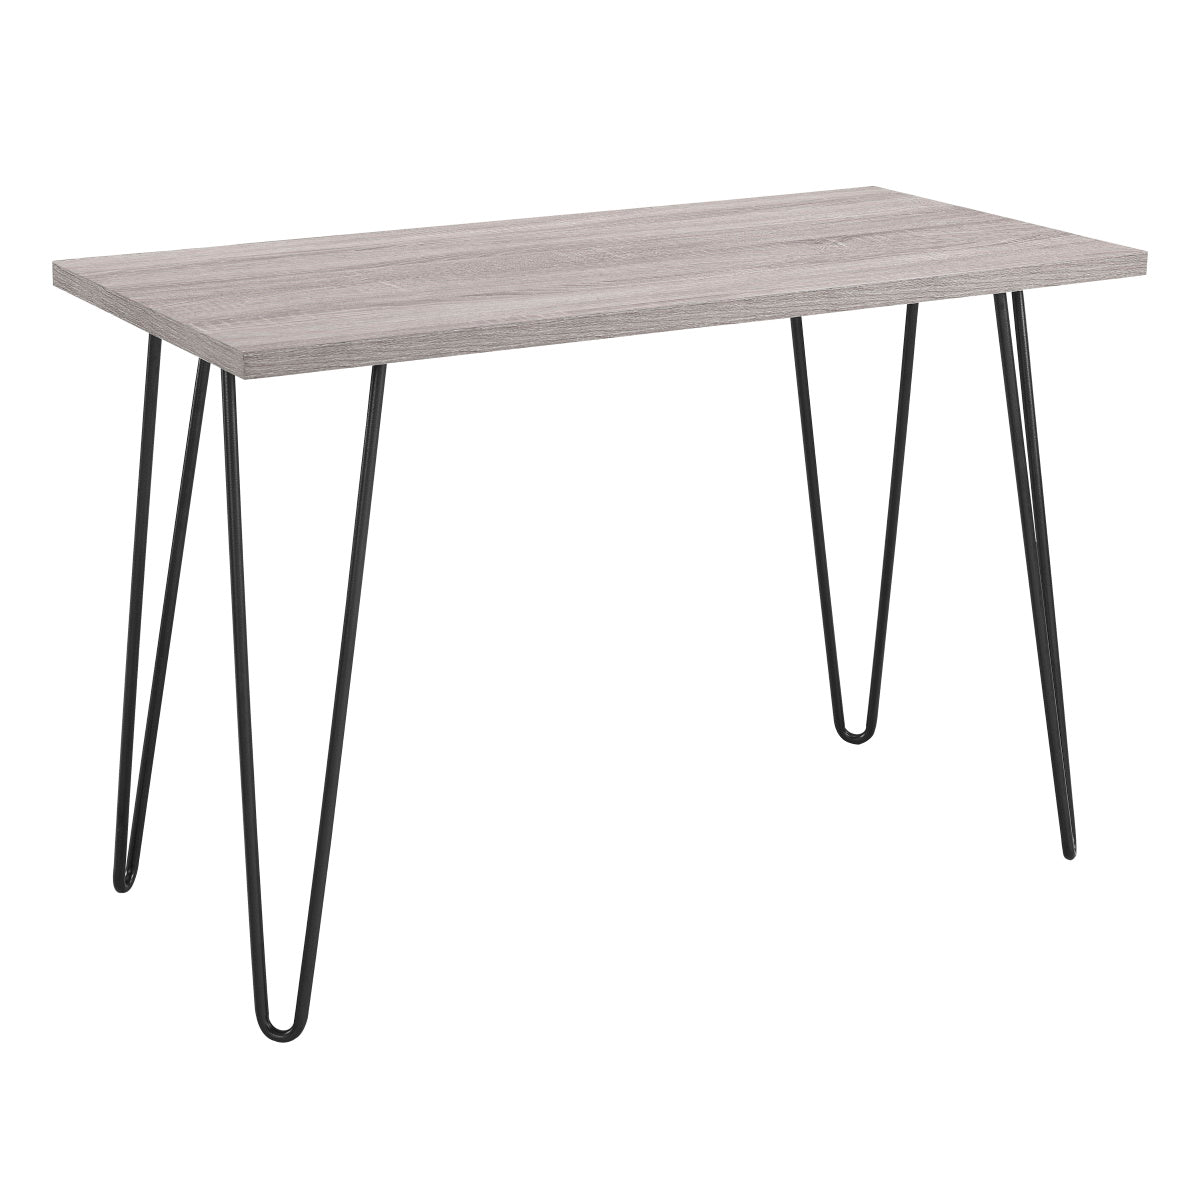 Home Owen Retro Distressed Home Office Desk - Grey Oak | 9851296PCOMUK from Dorel Home - DID Electrical